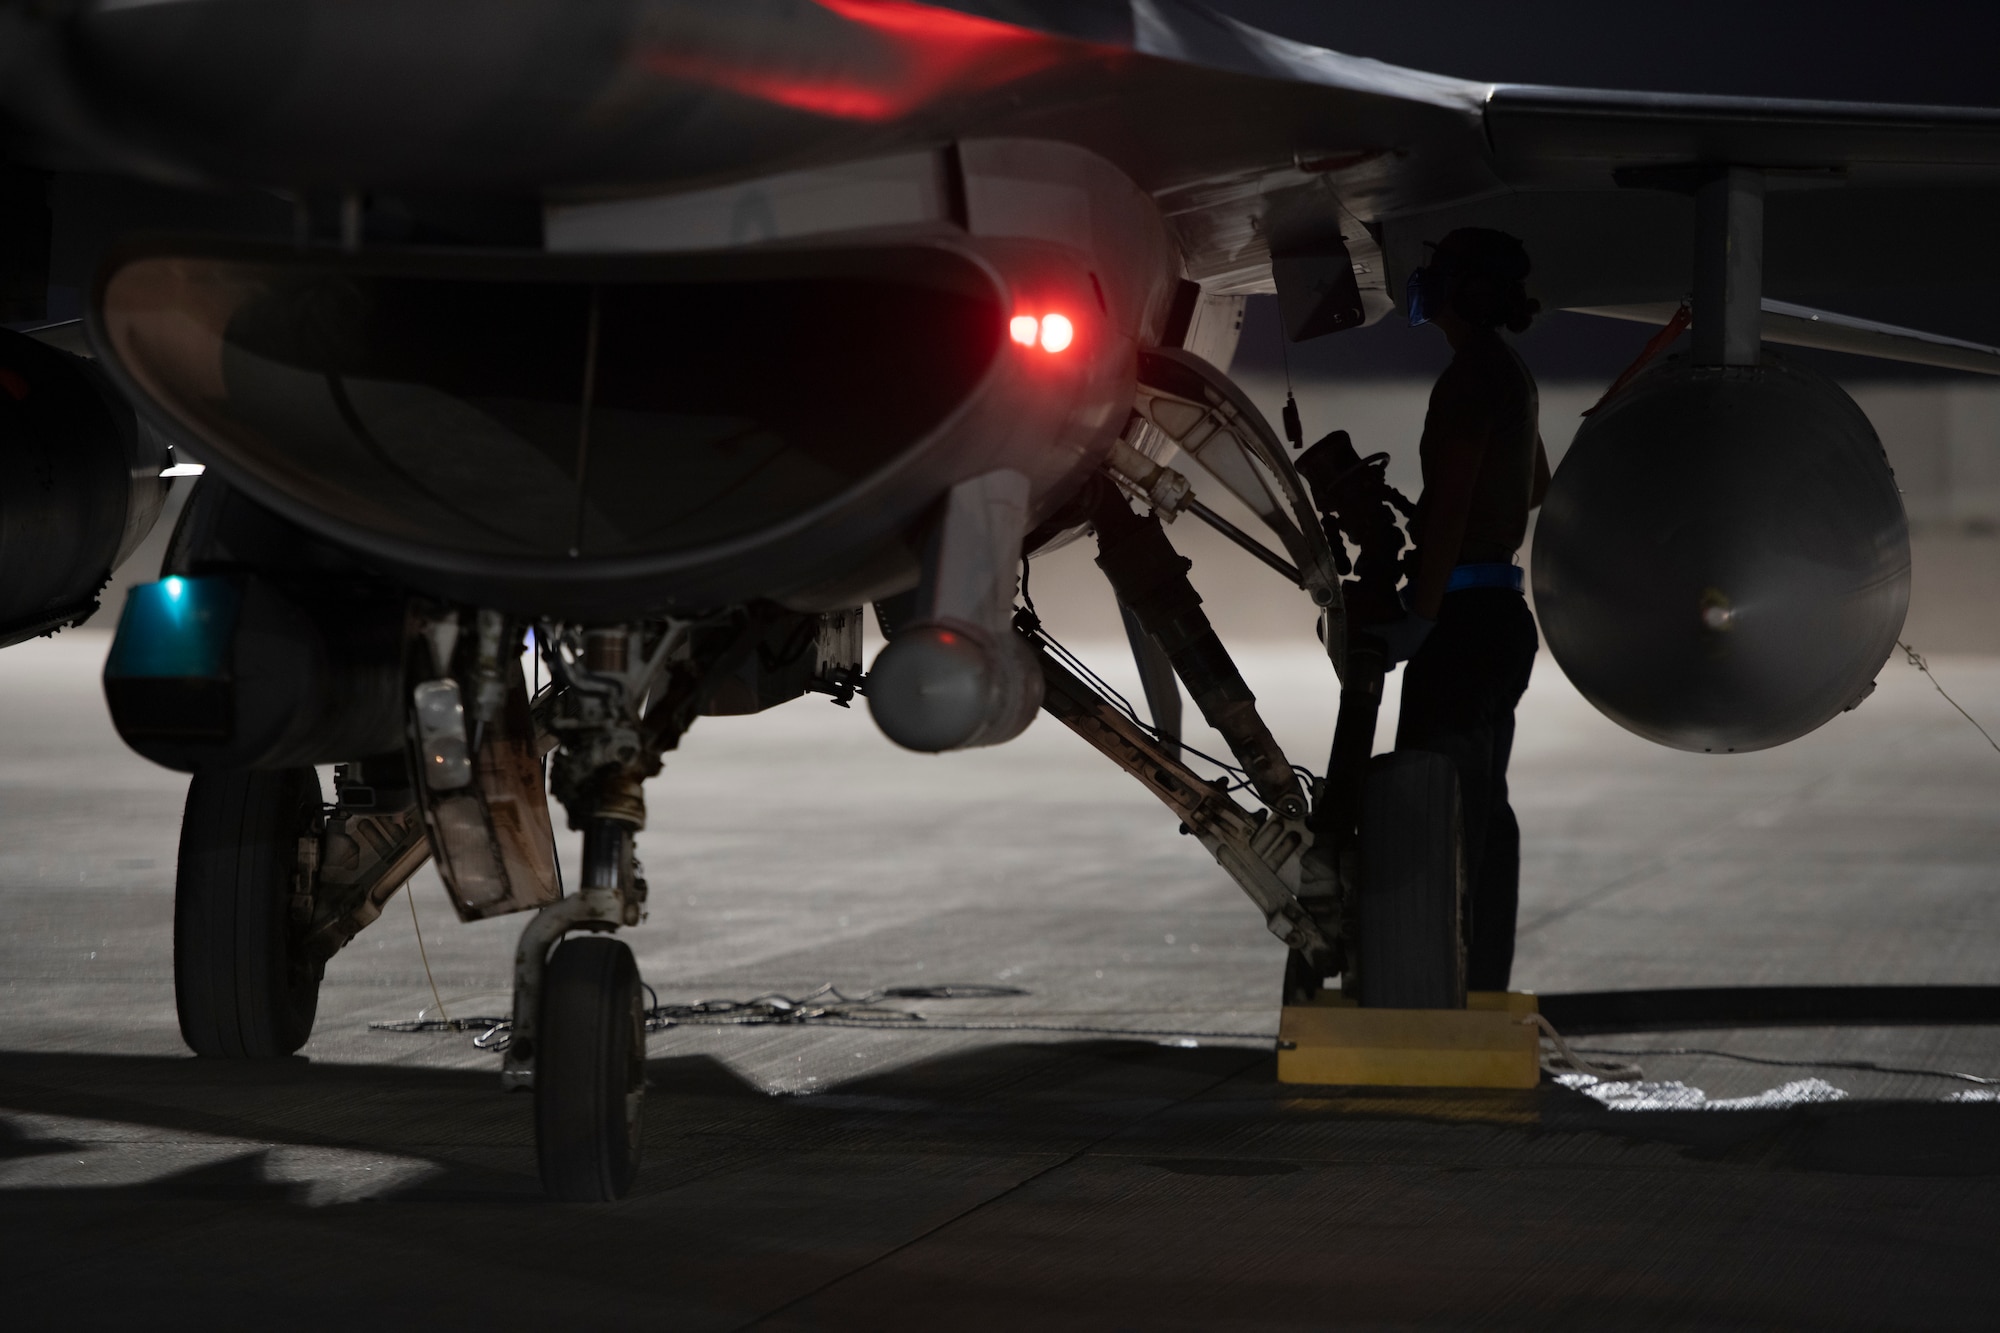 Airmen attaches fuel nozzle to airplane.